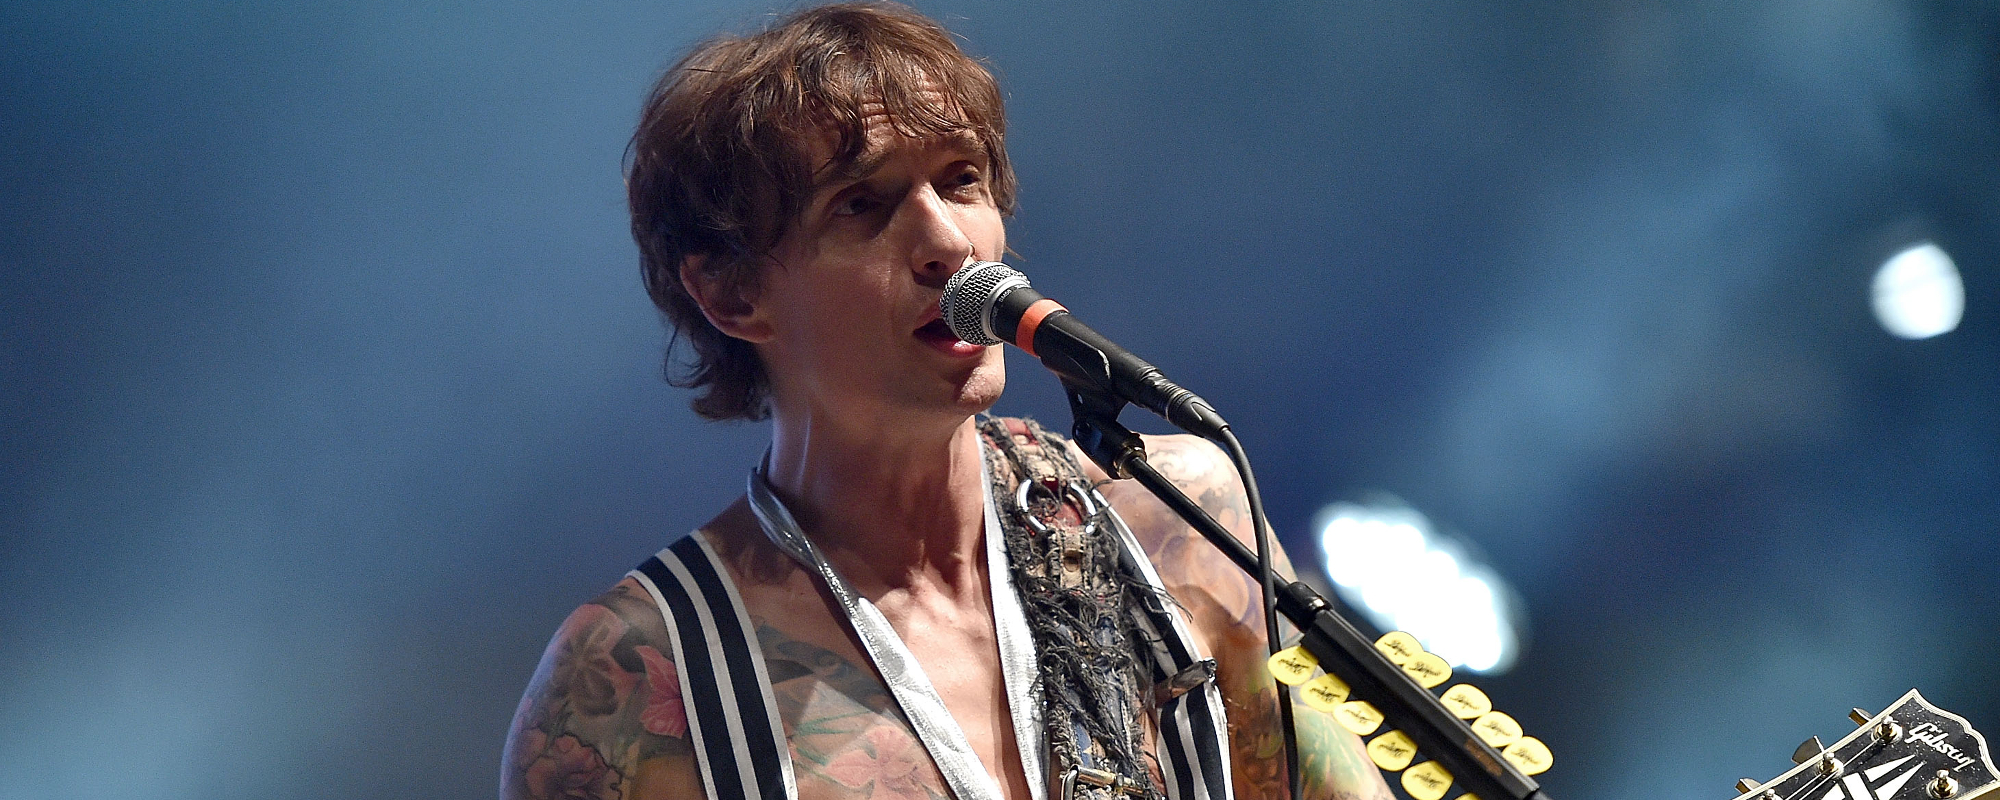 Justin Hawkins Opens Up to Fans About Living With “Consequences” Over Darkness Break-Up